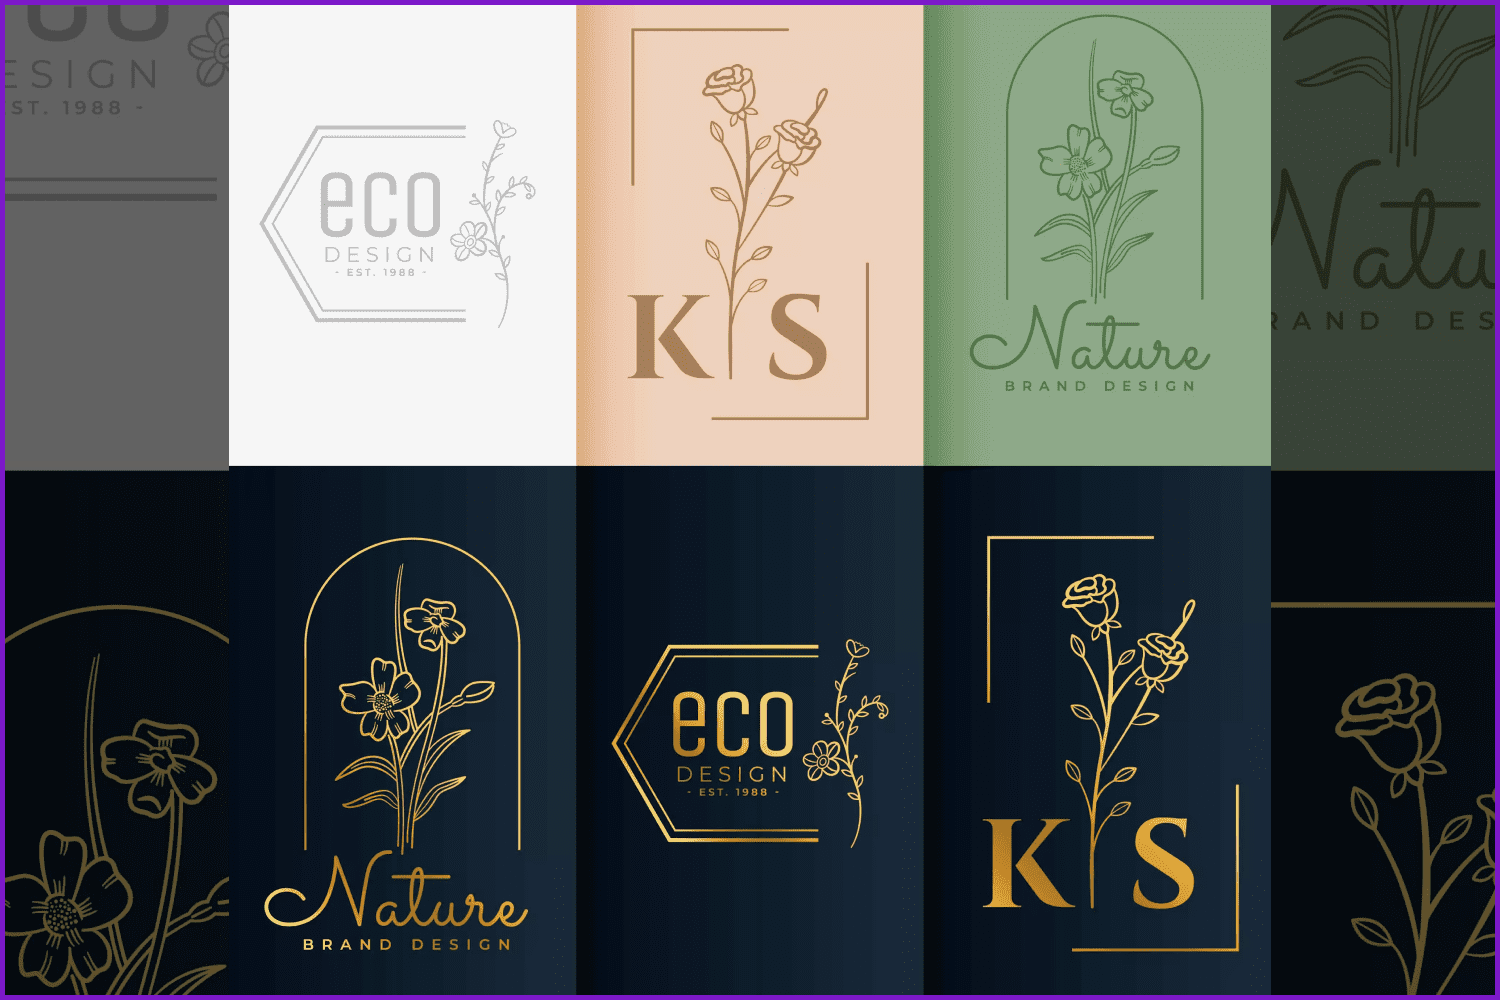 Collage of color images of logos in the form of silhouettes of flowers.